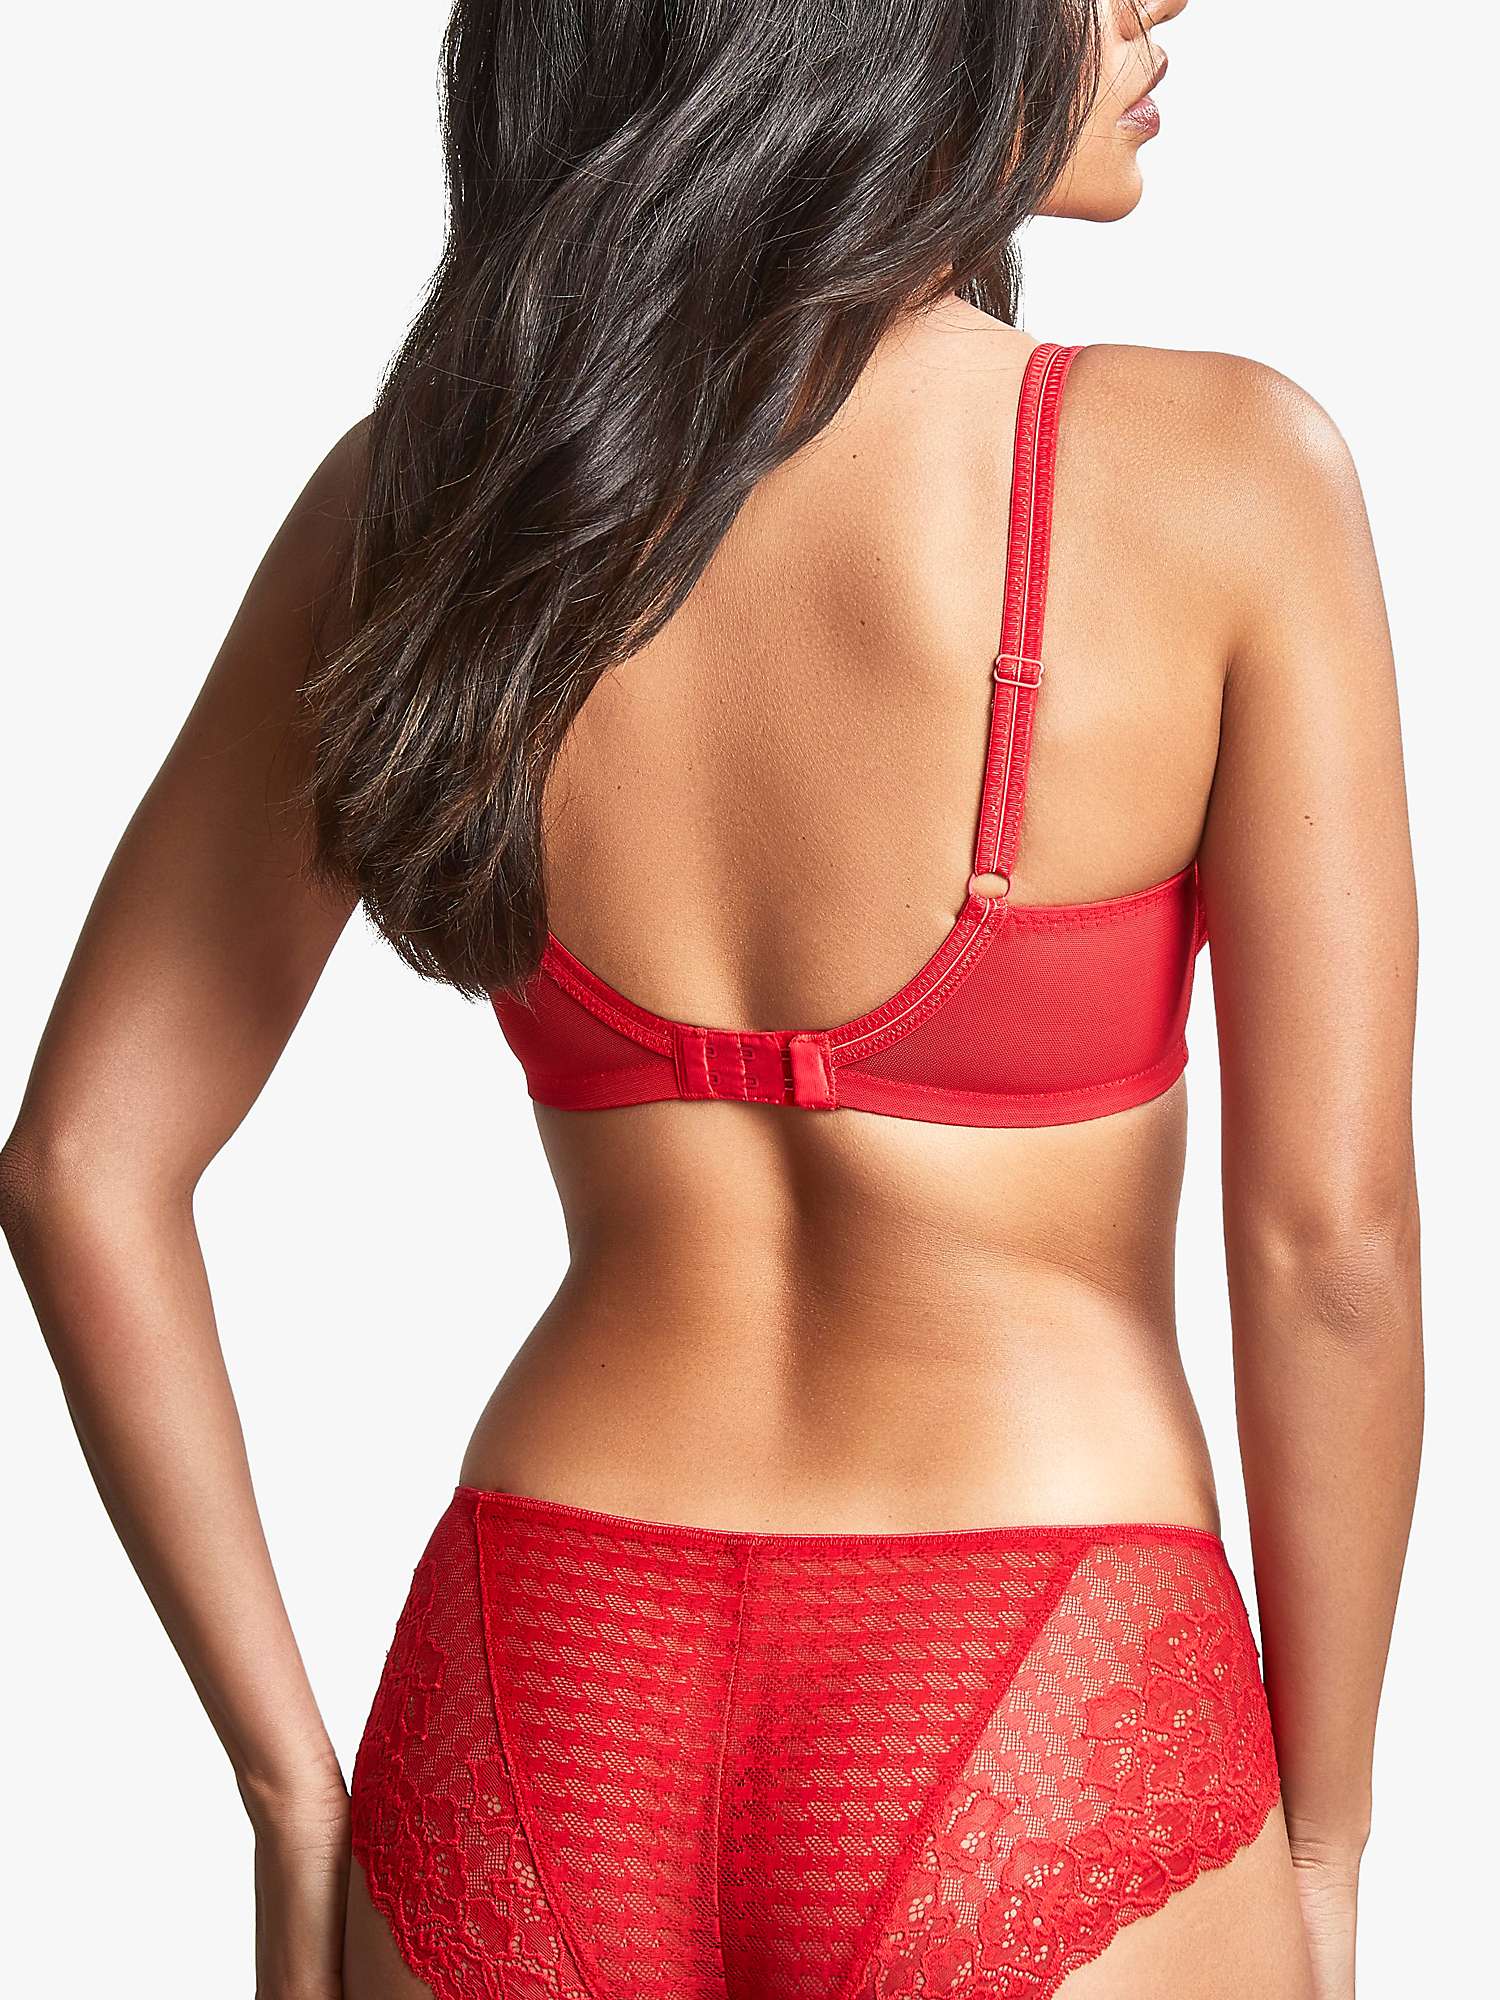 Buy Panache Envy Classic Knickers Online at johnlewis.com